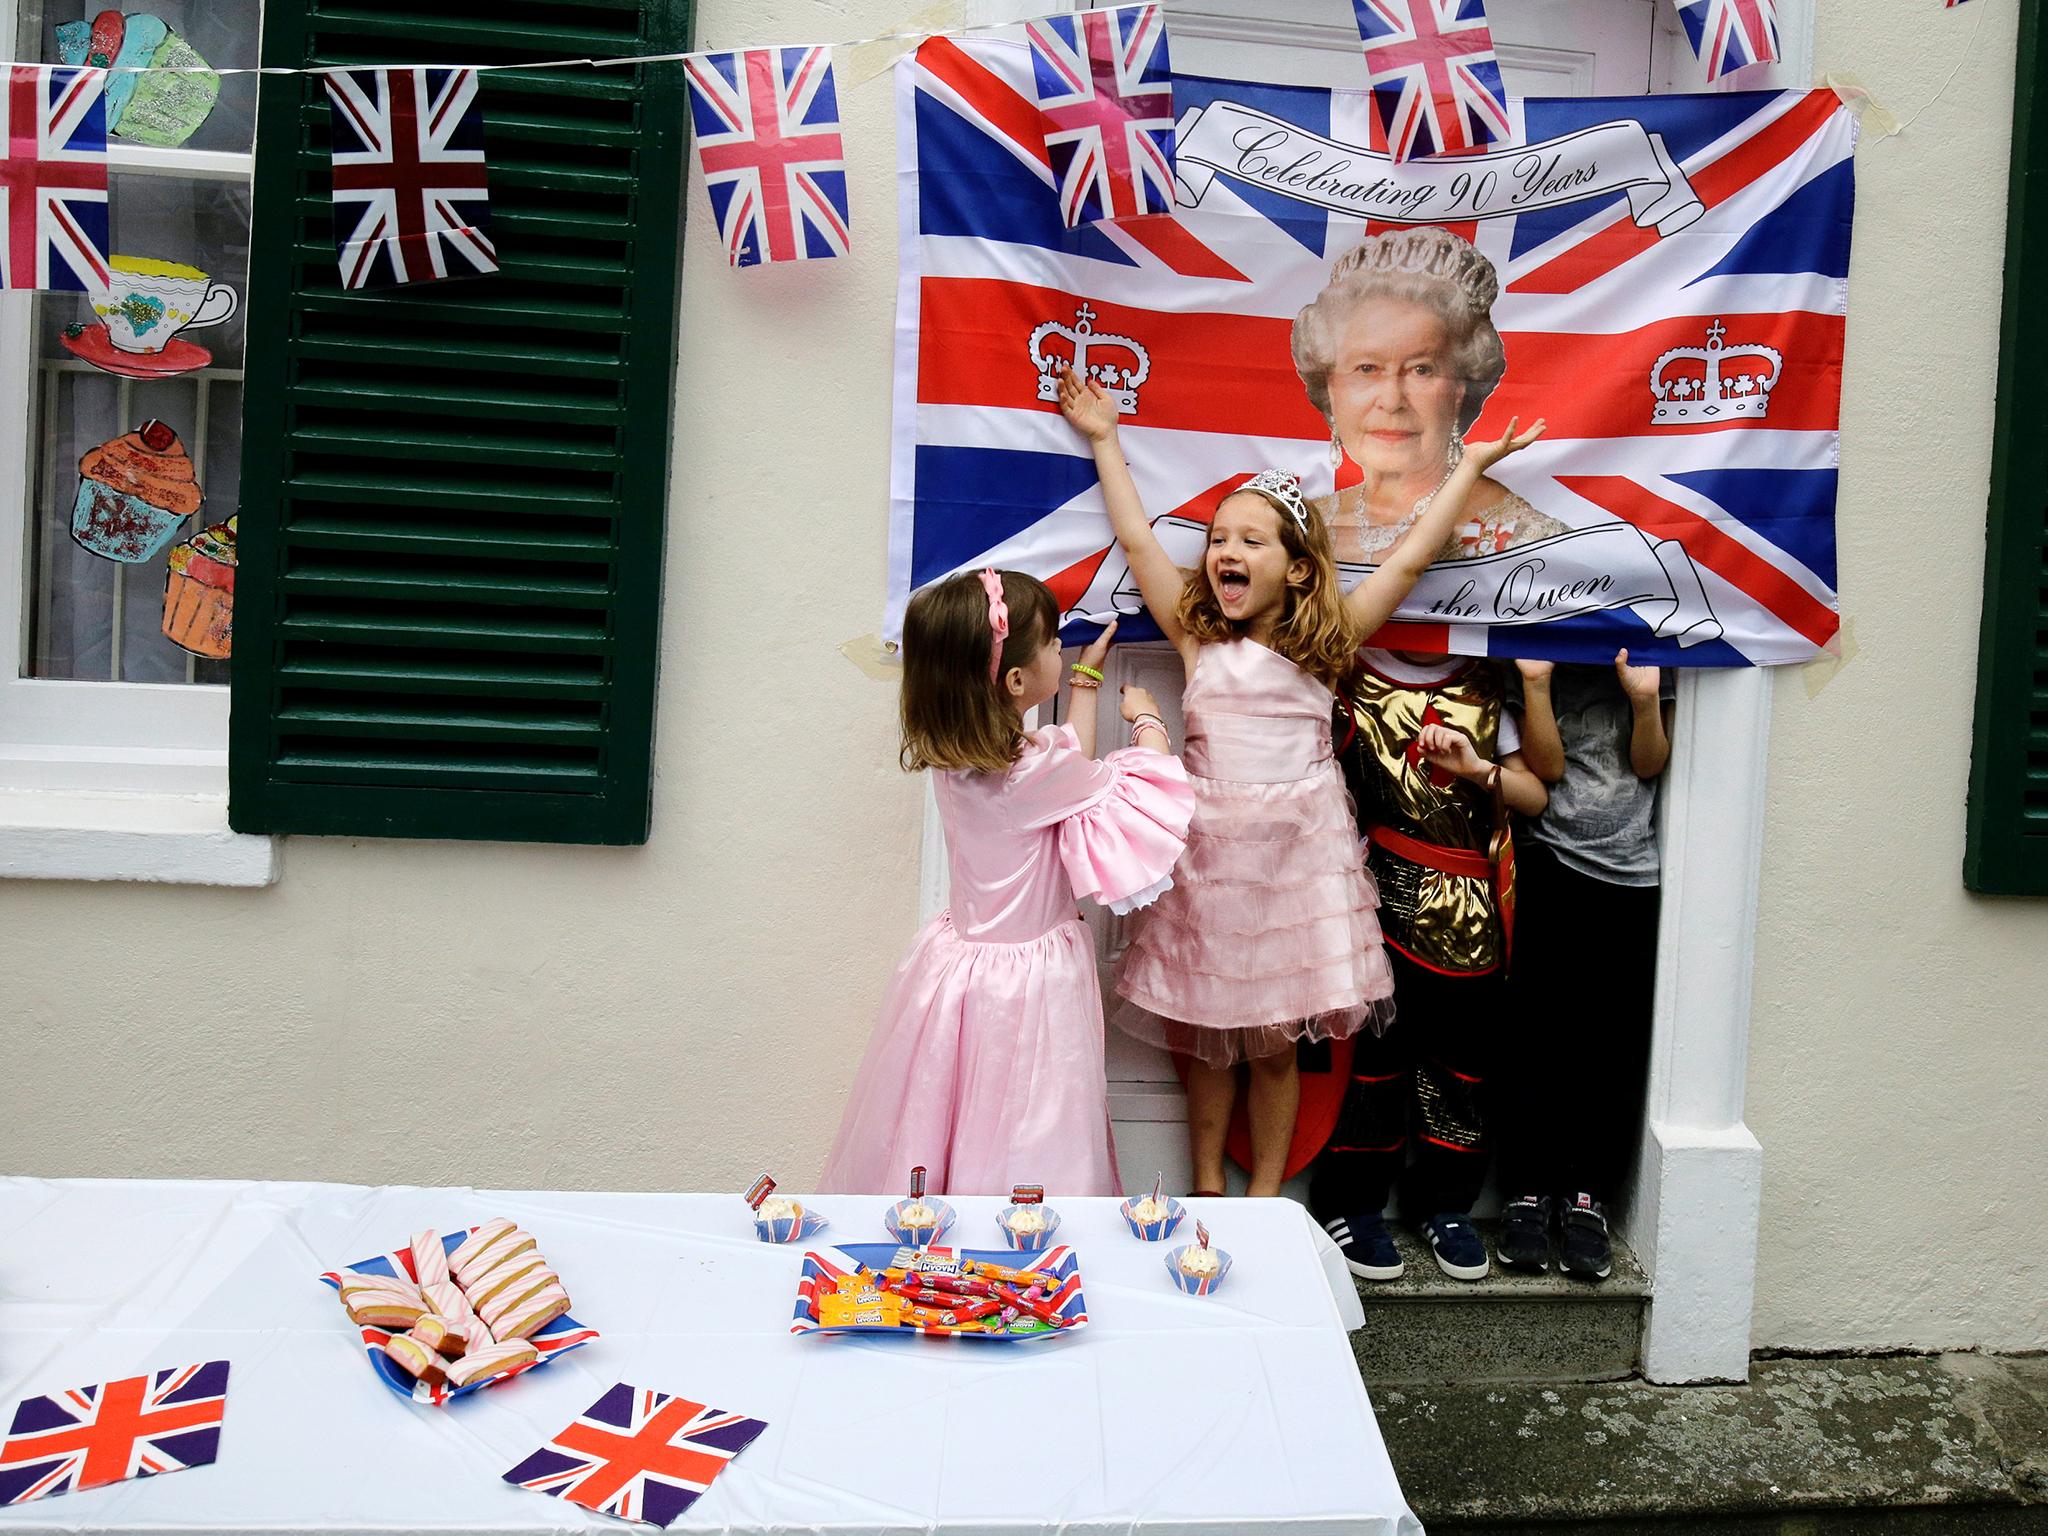 Celebrations for the Queen’s birthday yesterday. UK sovereignty lies with the Crown in Parliament – in practice this means Her Majesty’s ministers